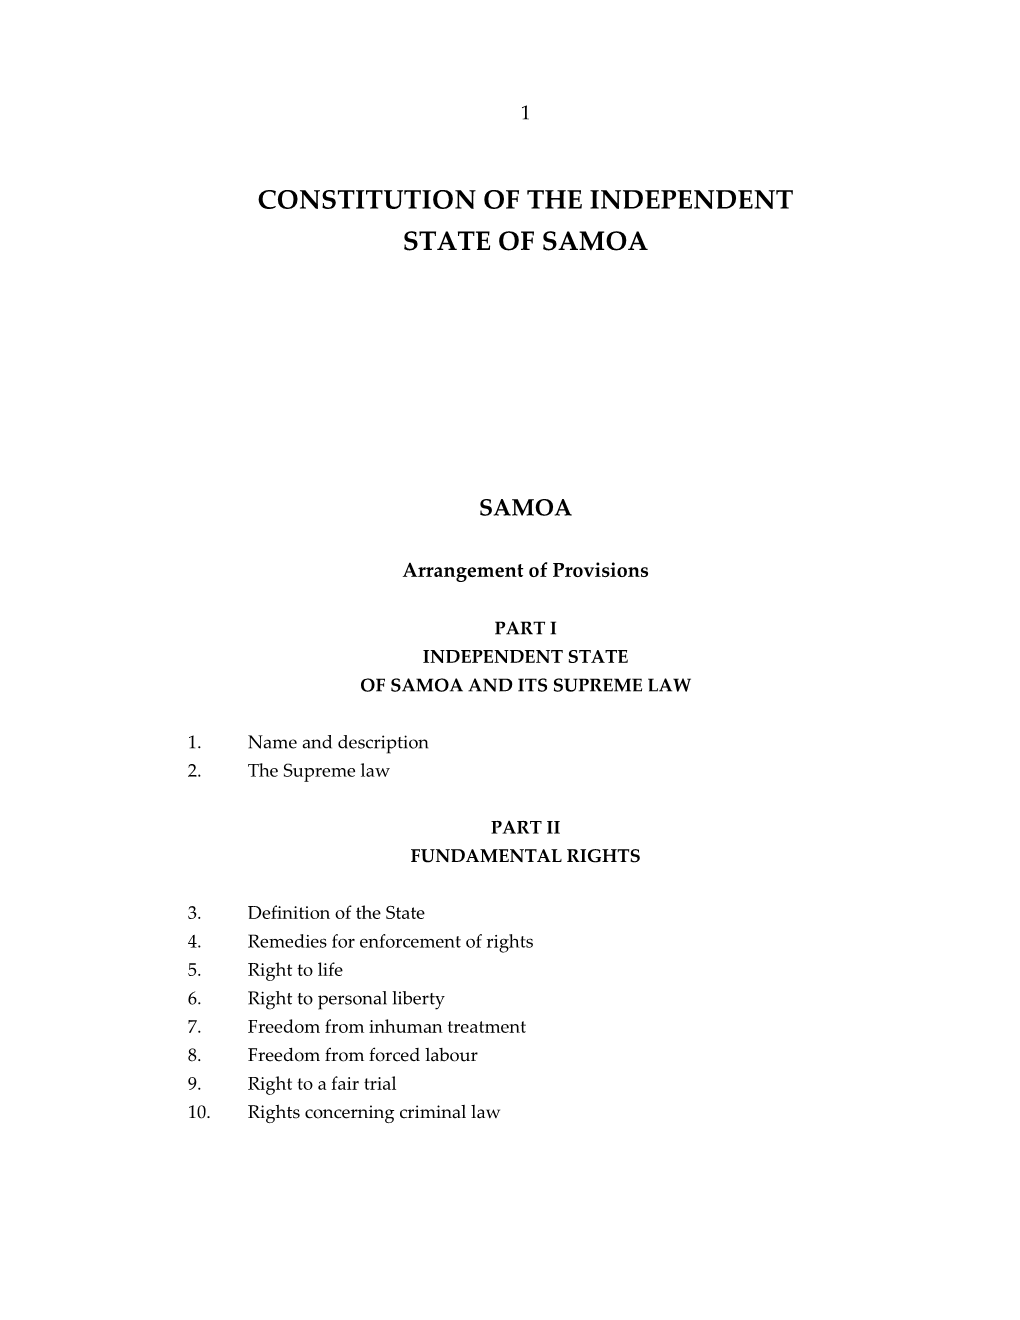 Constitution of the Independent State of Samoa